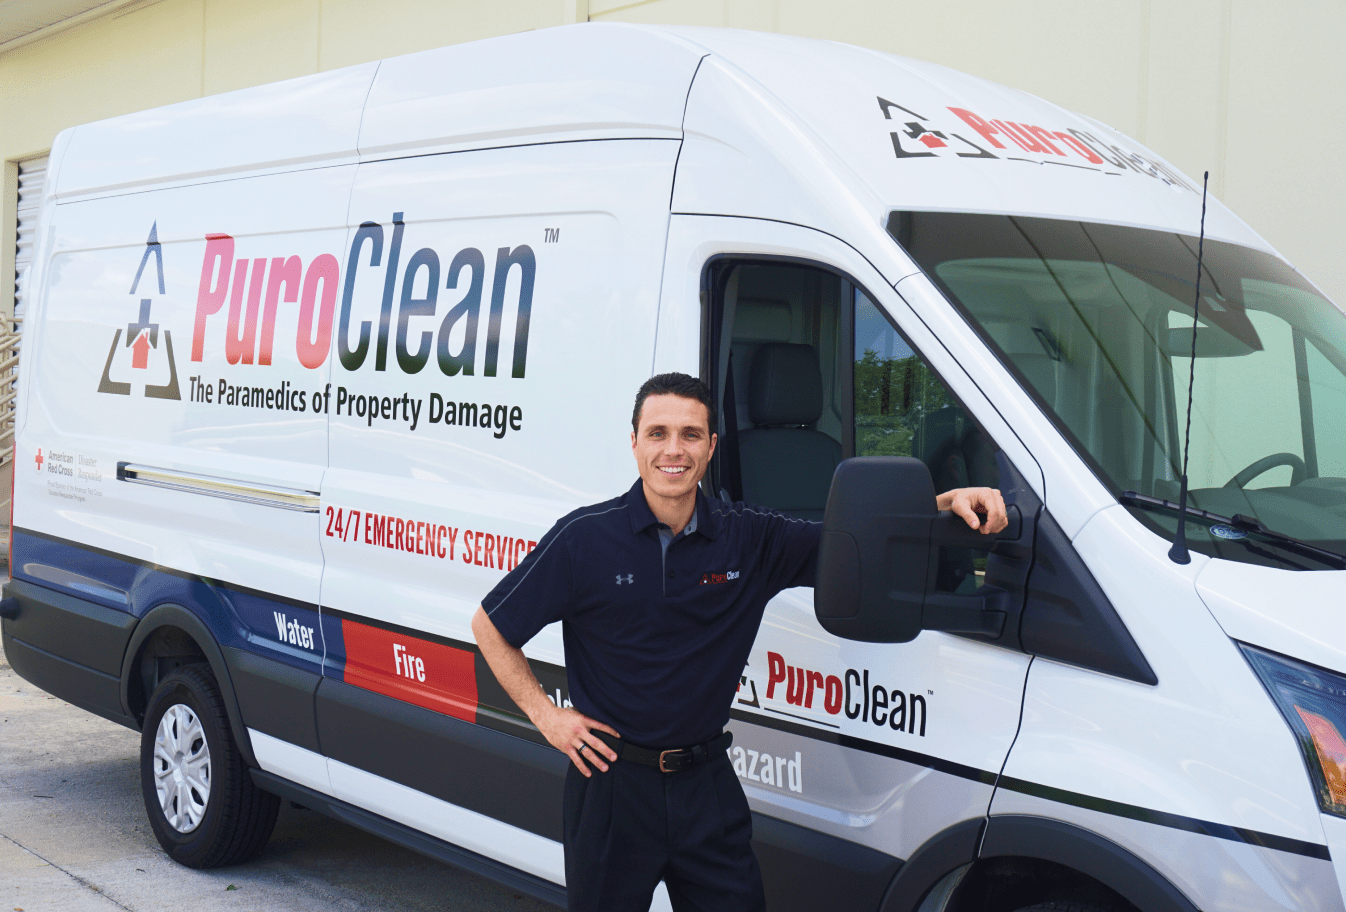 PuroClean Franchise owner in front of his van